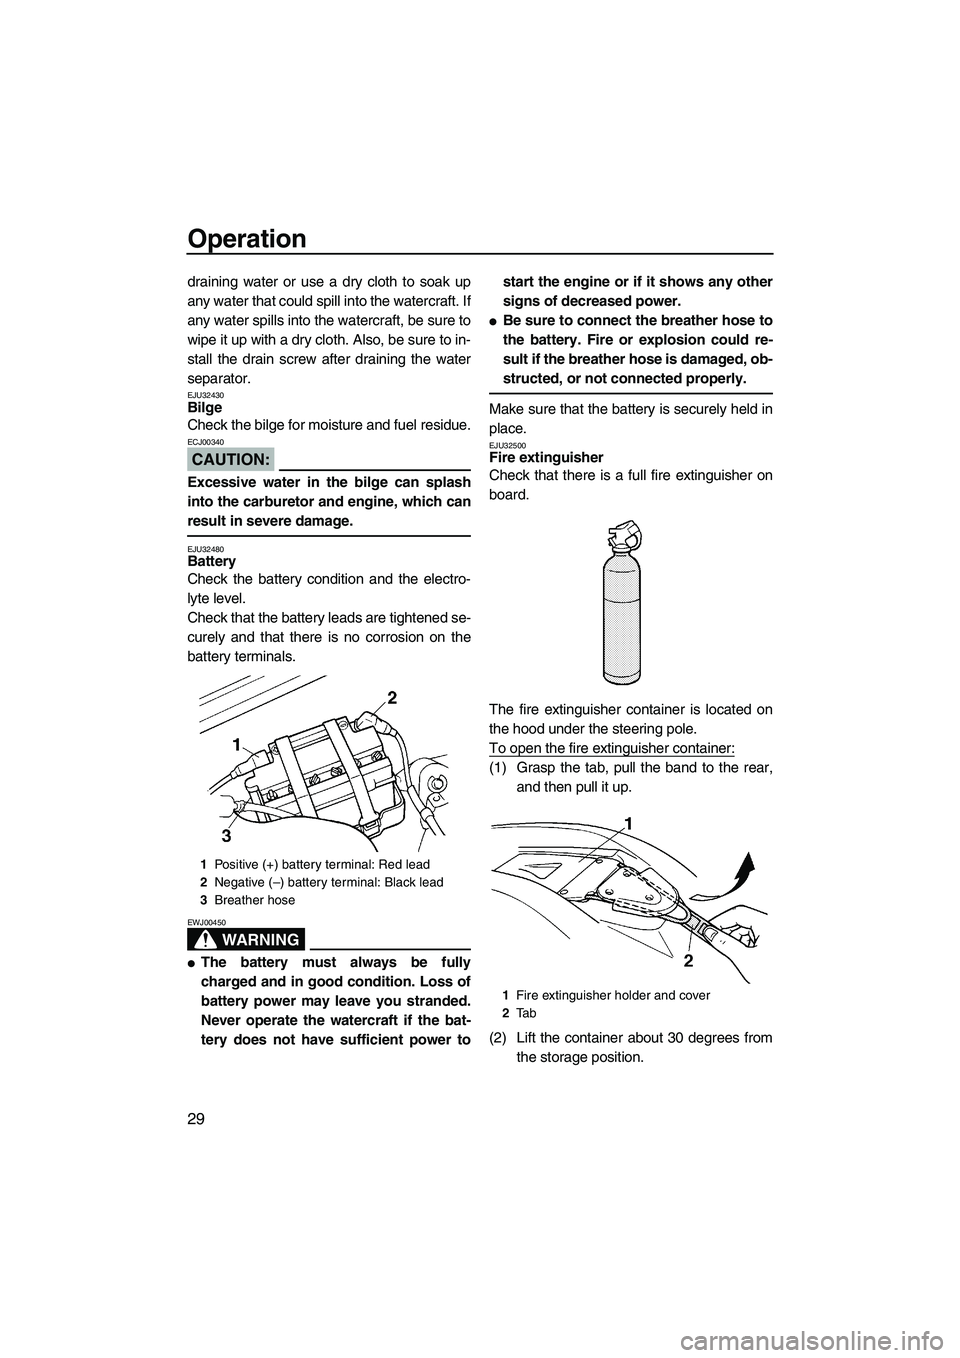 YAMAHA SUPERJET 2007  Owners Manual Operation
29
draining water or use a dry cloth to soak up
any water that could spill into the watercraft. If
any water spills into the watercraft, be sure to
wipe it up with a dry cloth. Also, be sure